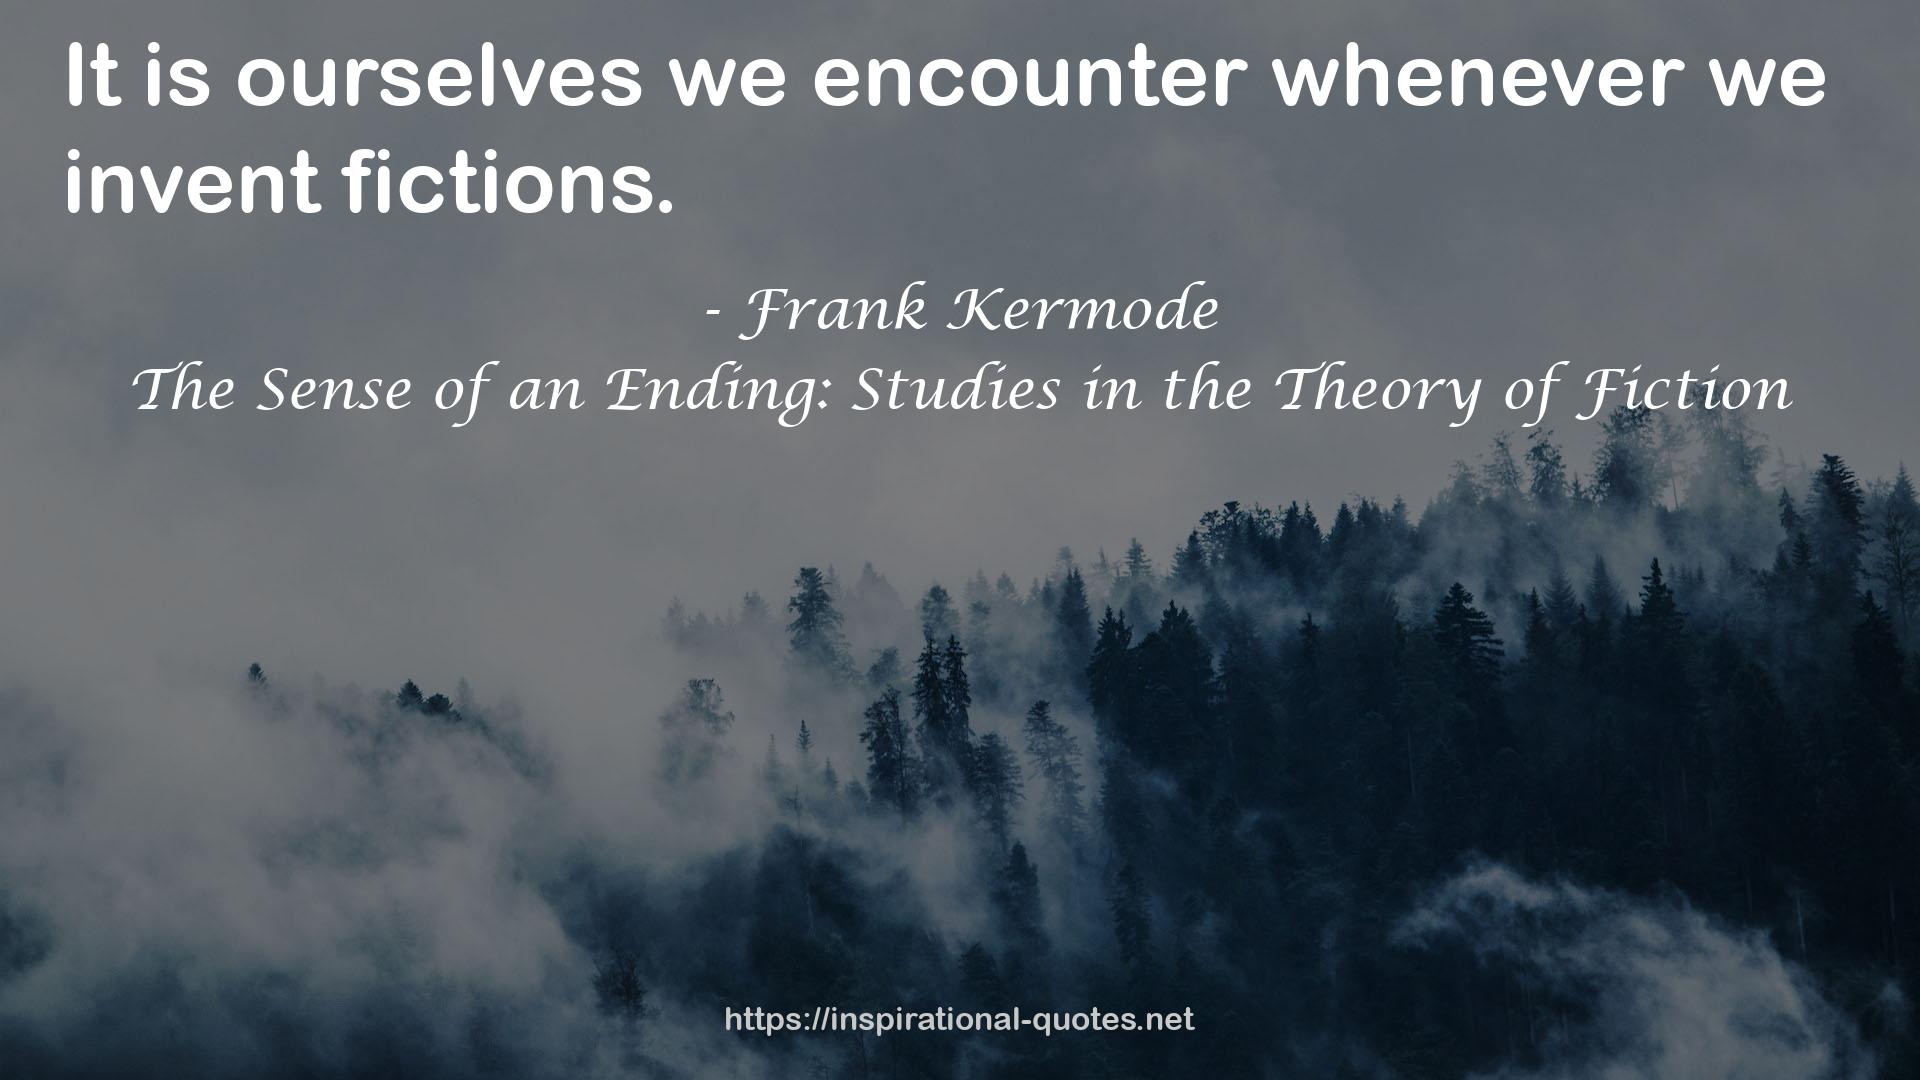 The Sense of an Ending: Studies in the Theory of Fiction QUOTES